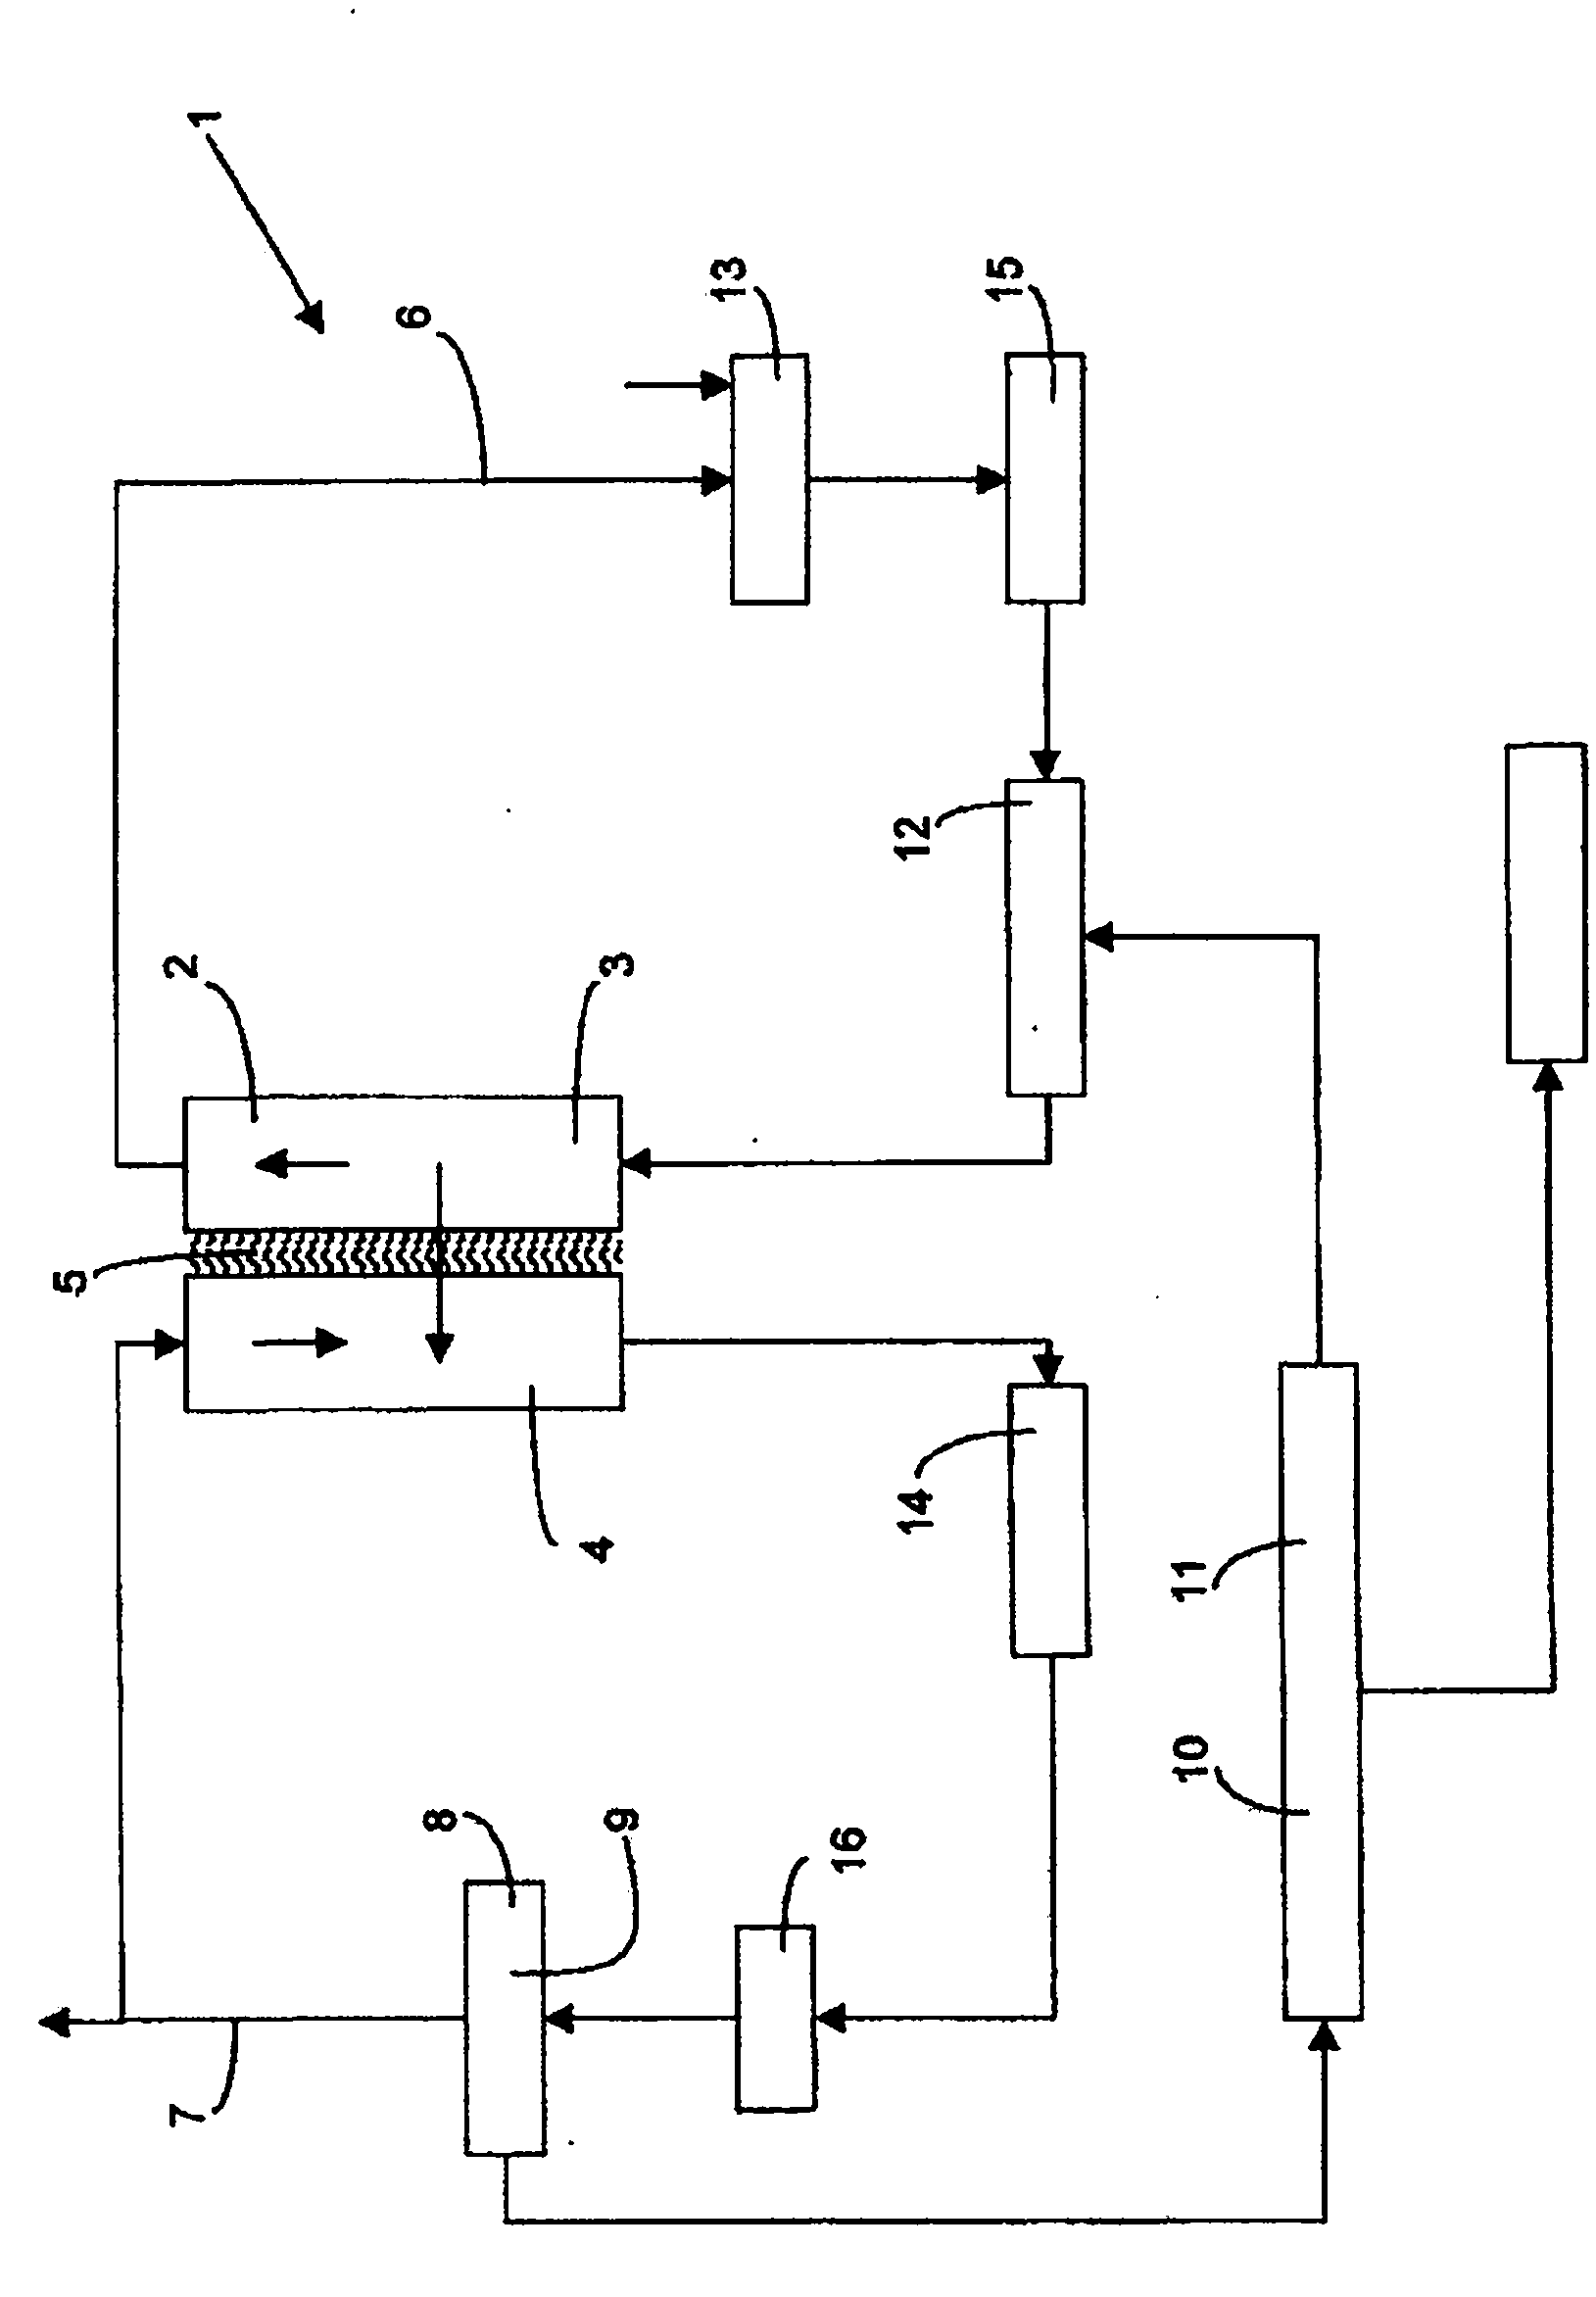 Apparatus and method for concentrating a fluid